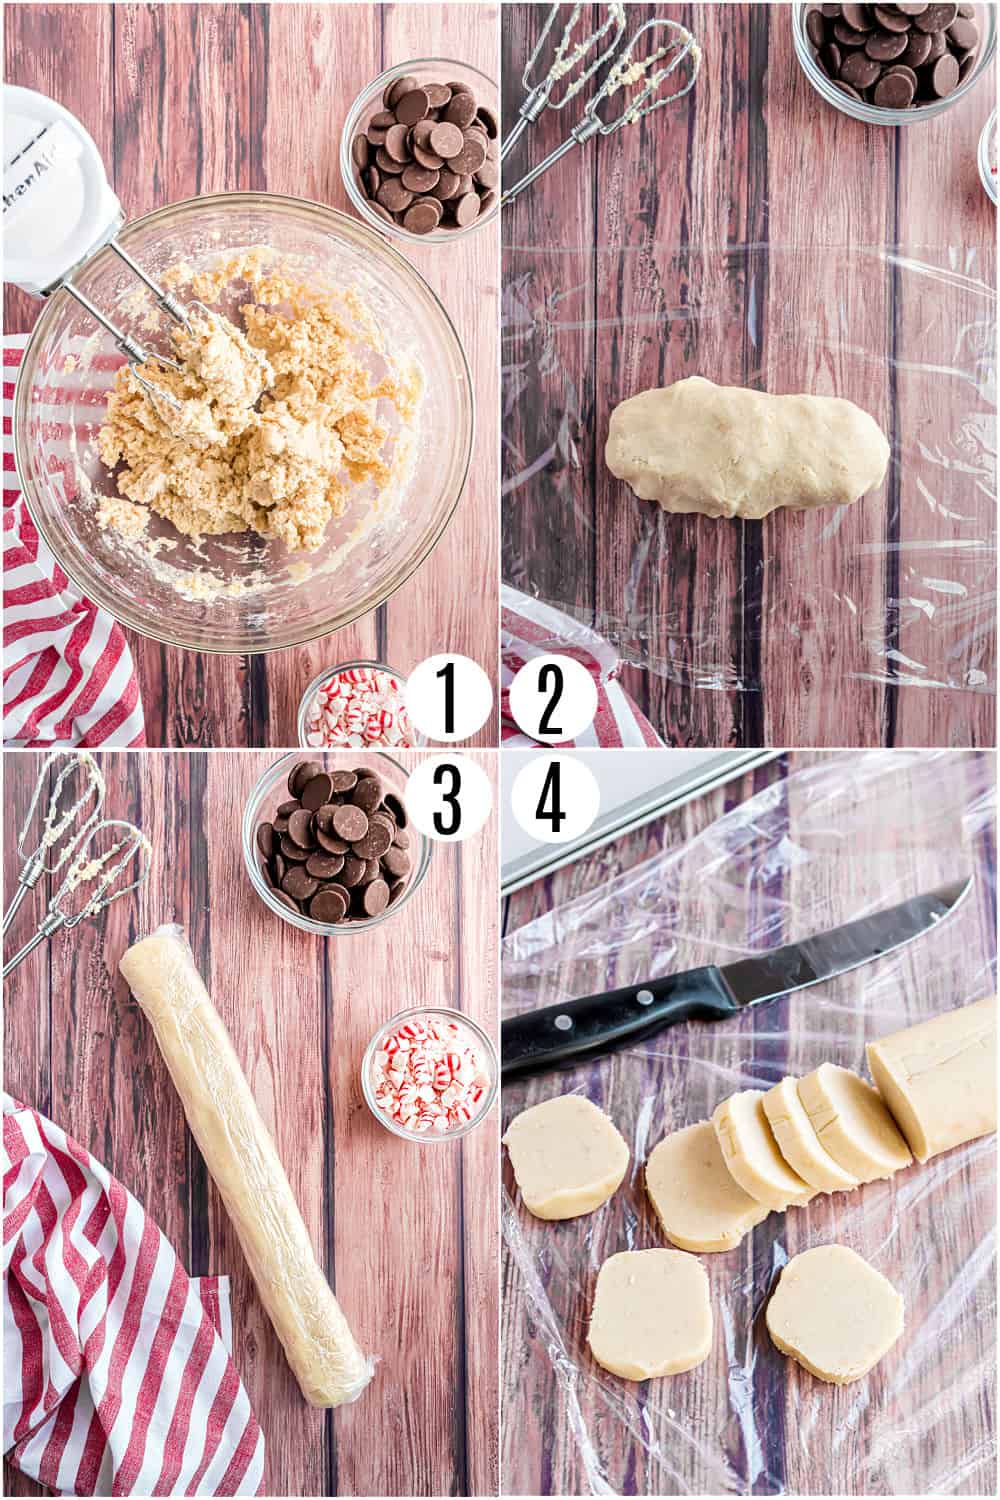 Step by step photos showing how to make shortbread cookies.